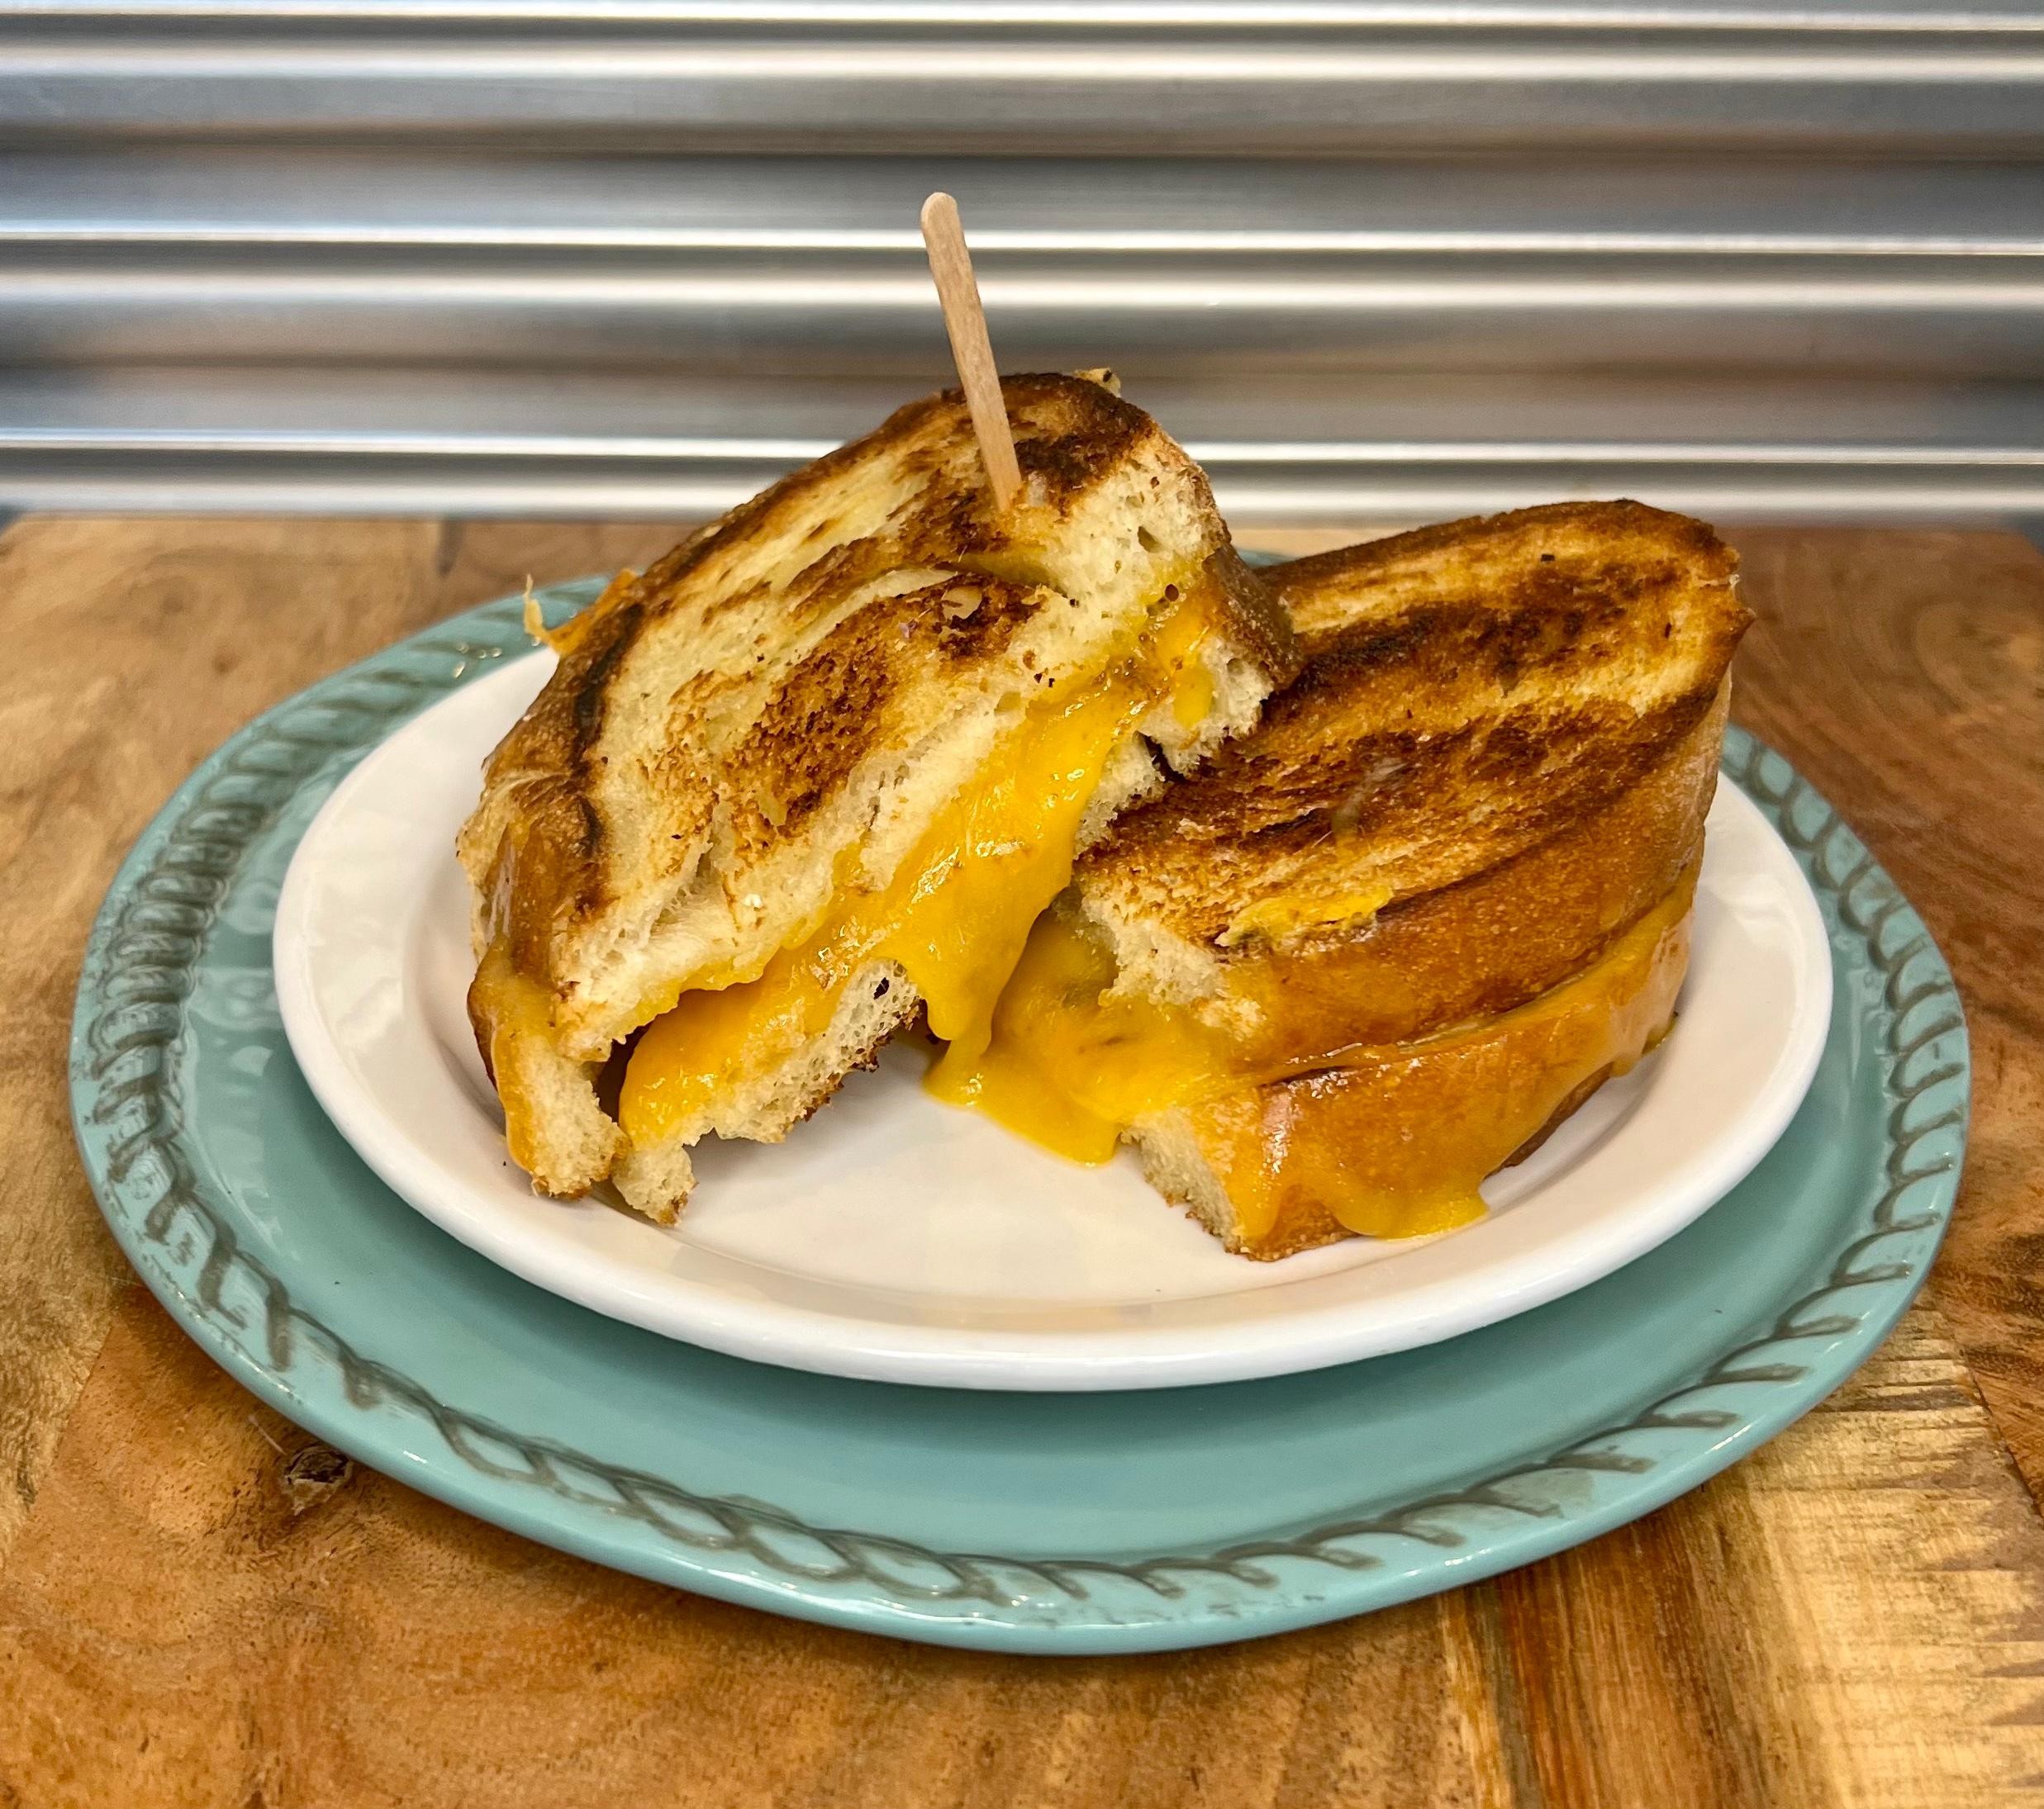 Classic Grilled Cheese